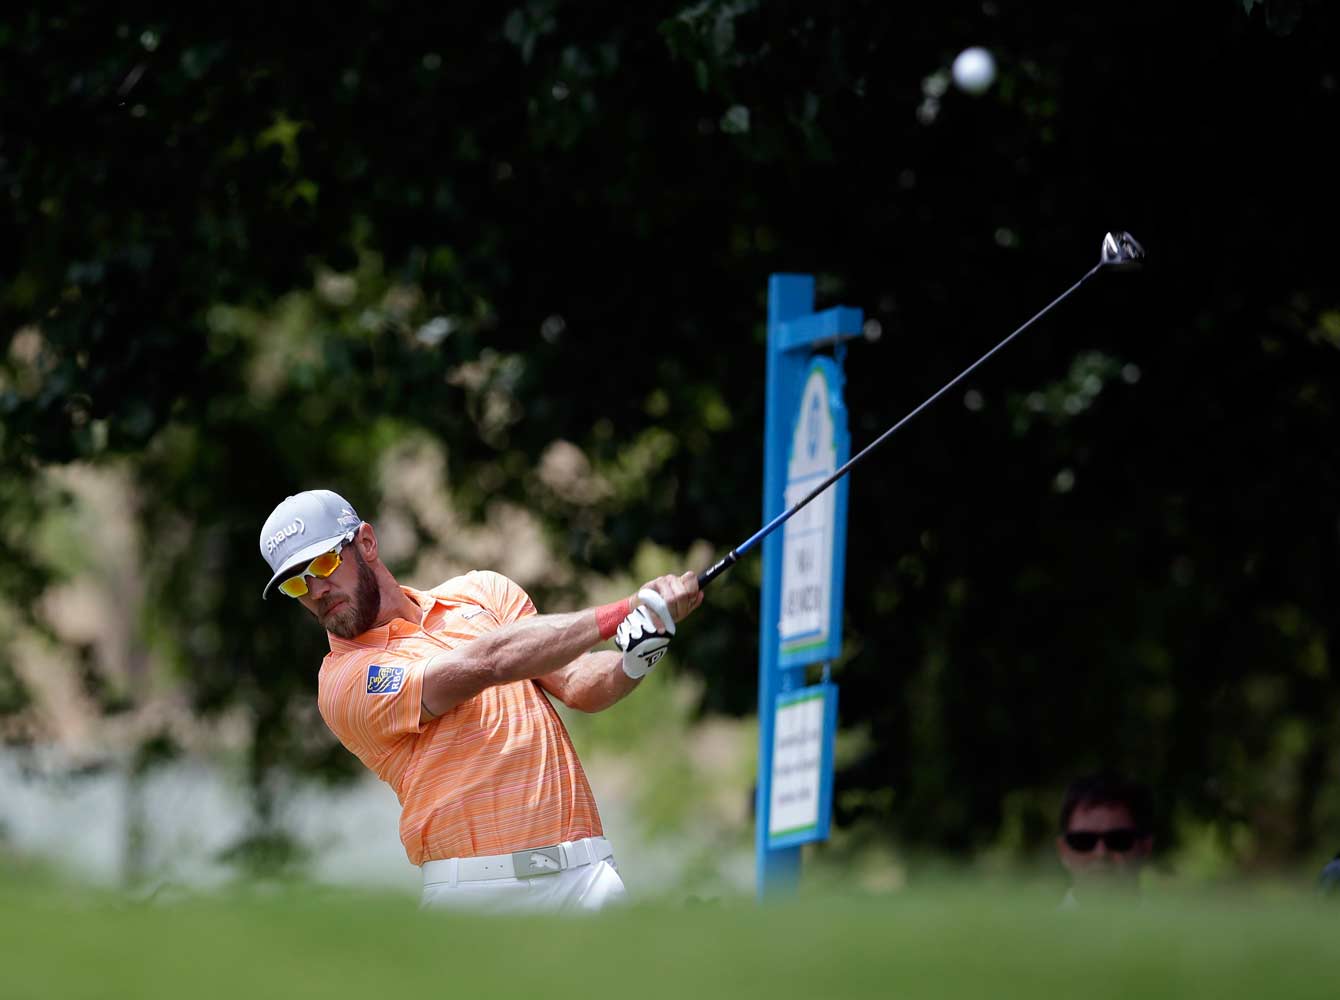 Graham hitting his first tee shot at the 3rd round of the 2014 Byron Nelson Championship tournament. Photo: The Canadian Press